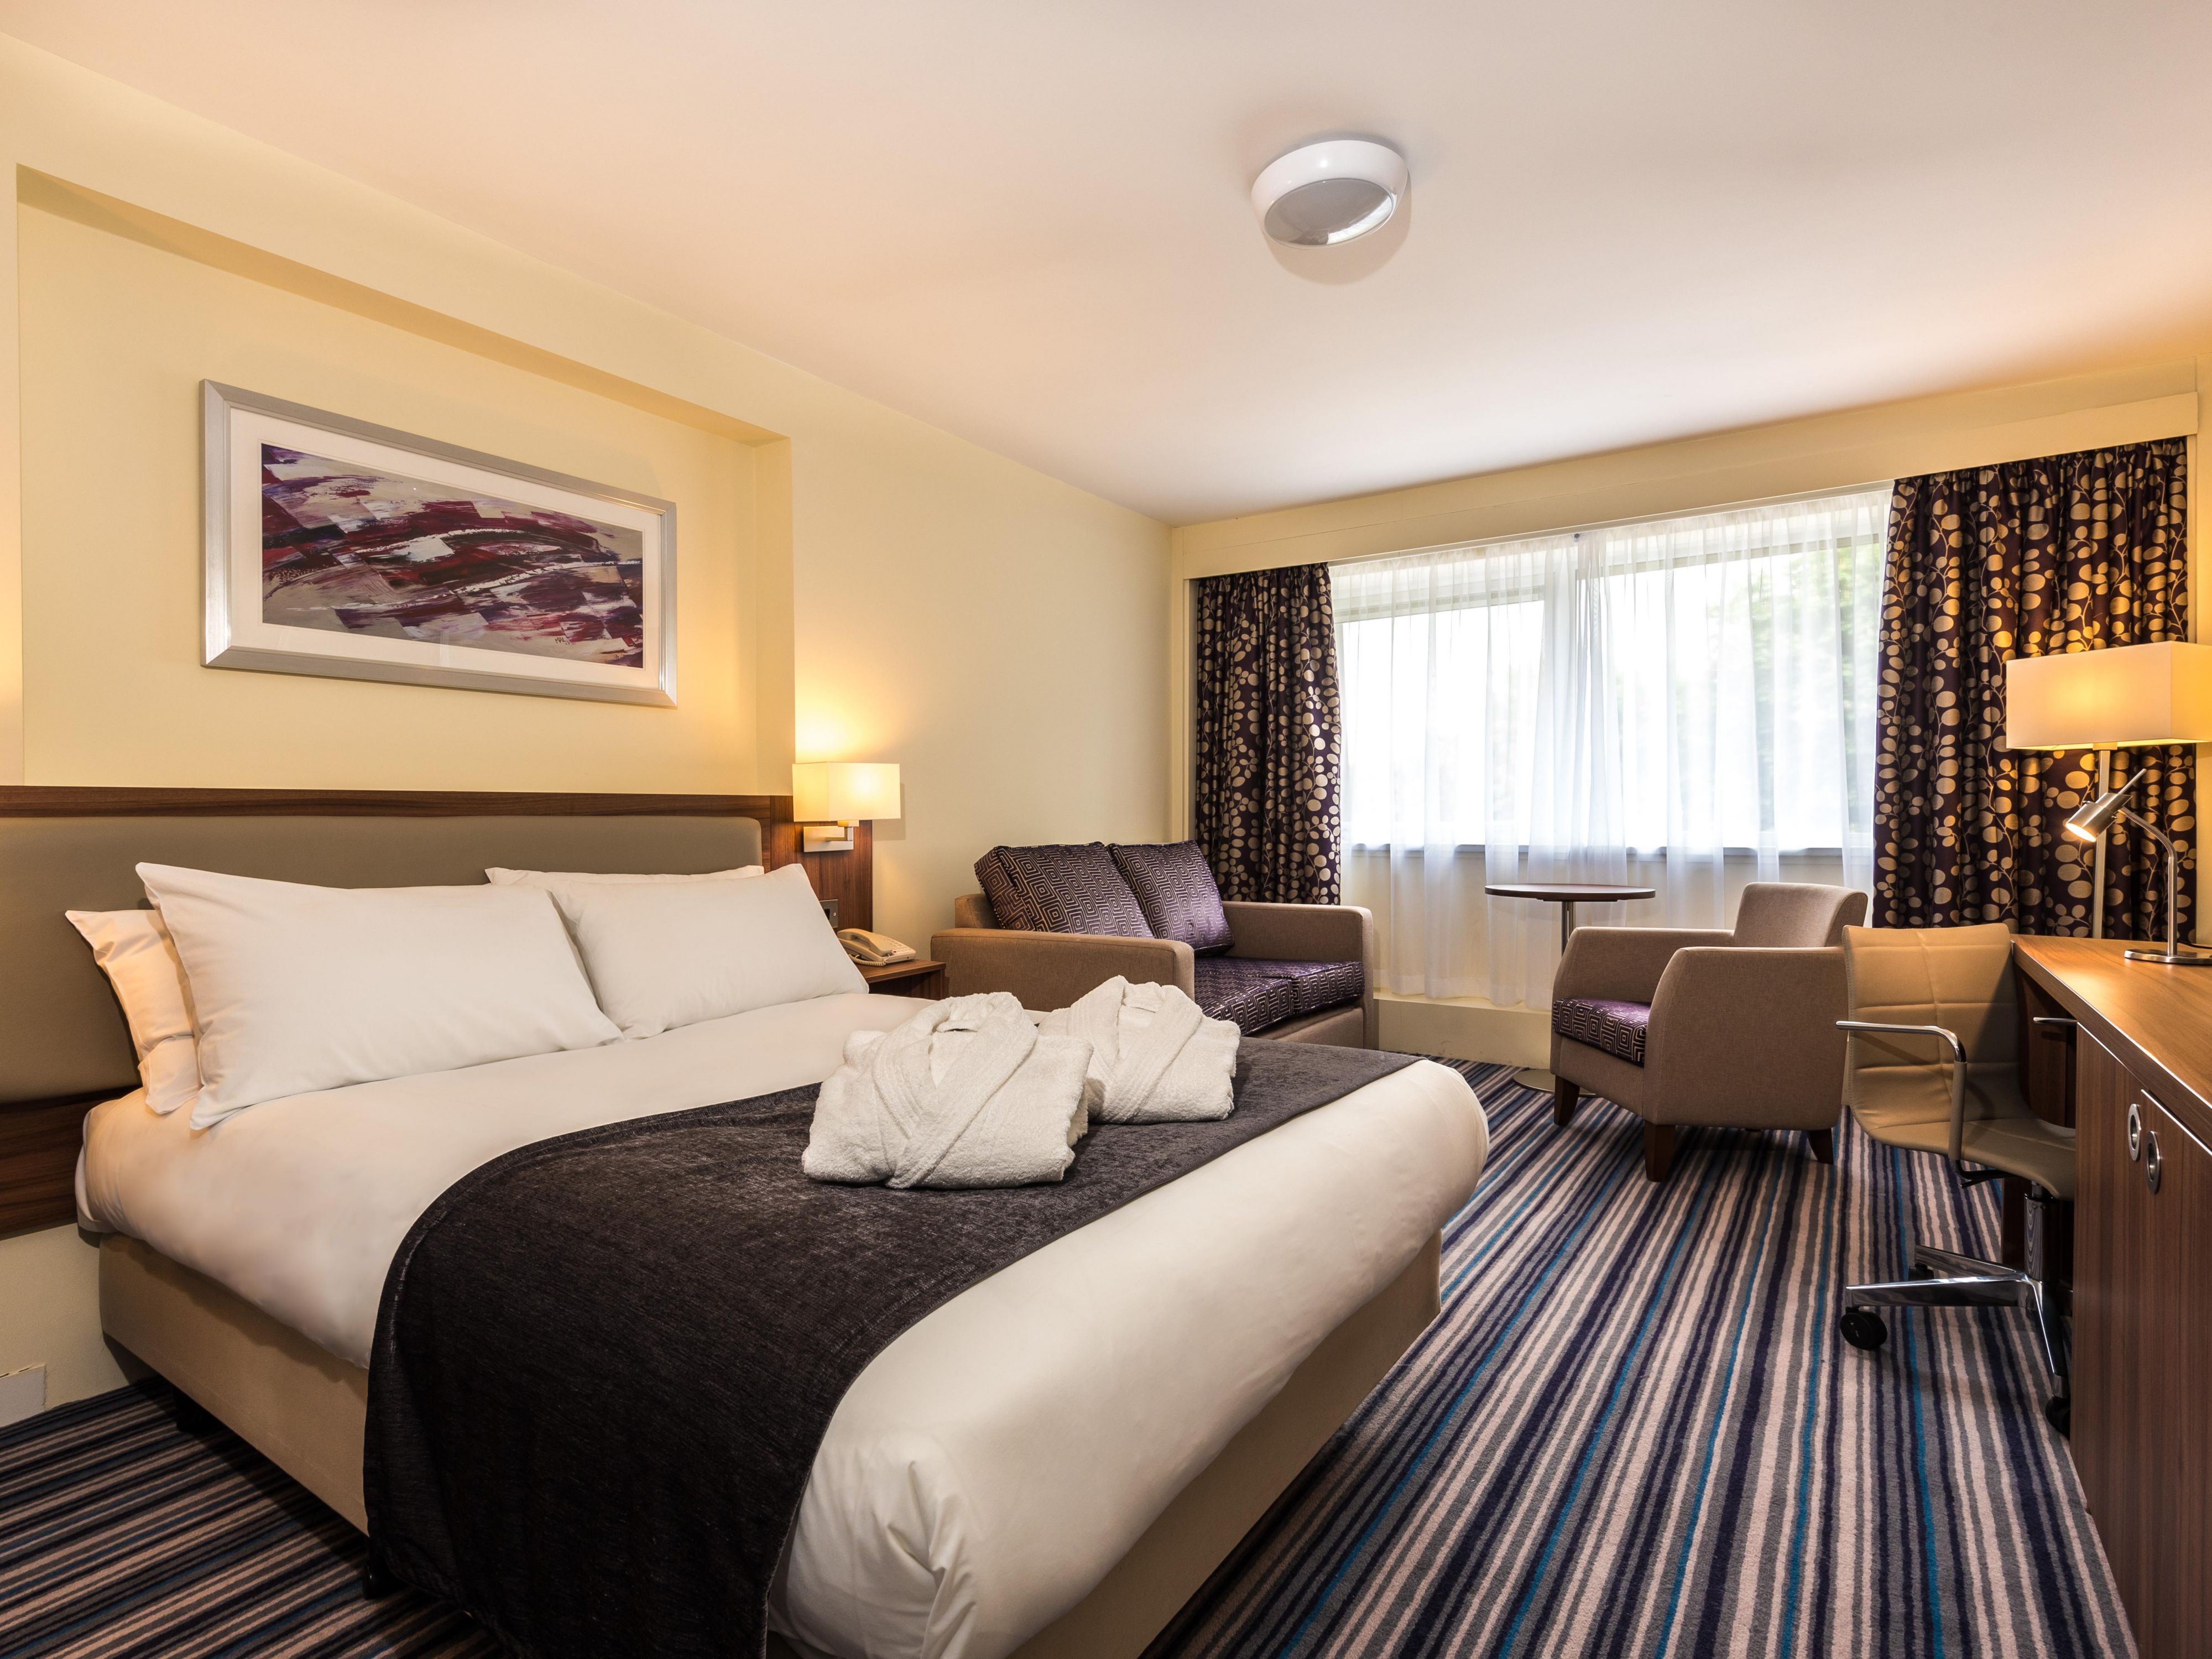 The safety of our guests and employees is our number one priority and we would like to reassure you that measures are in place to provide a clean, safe and welcoming environment in our hotel. Find out more by clicking 'Learn More' below.